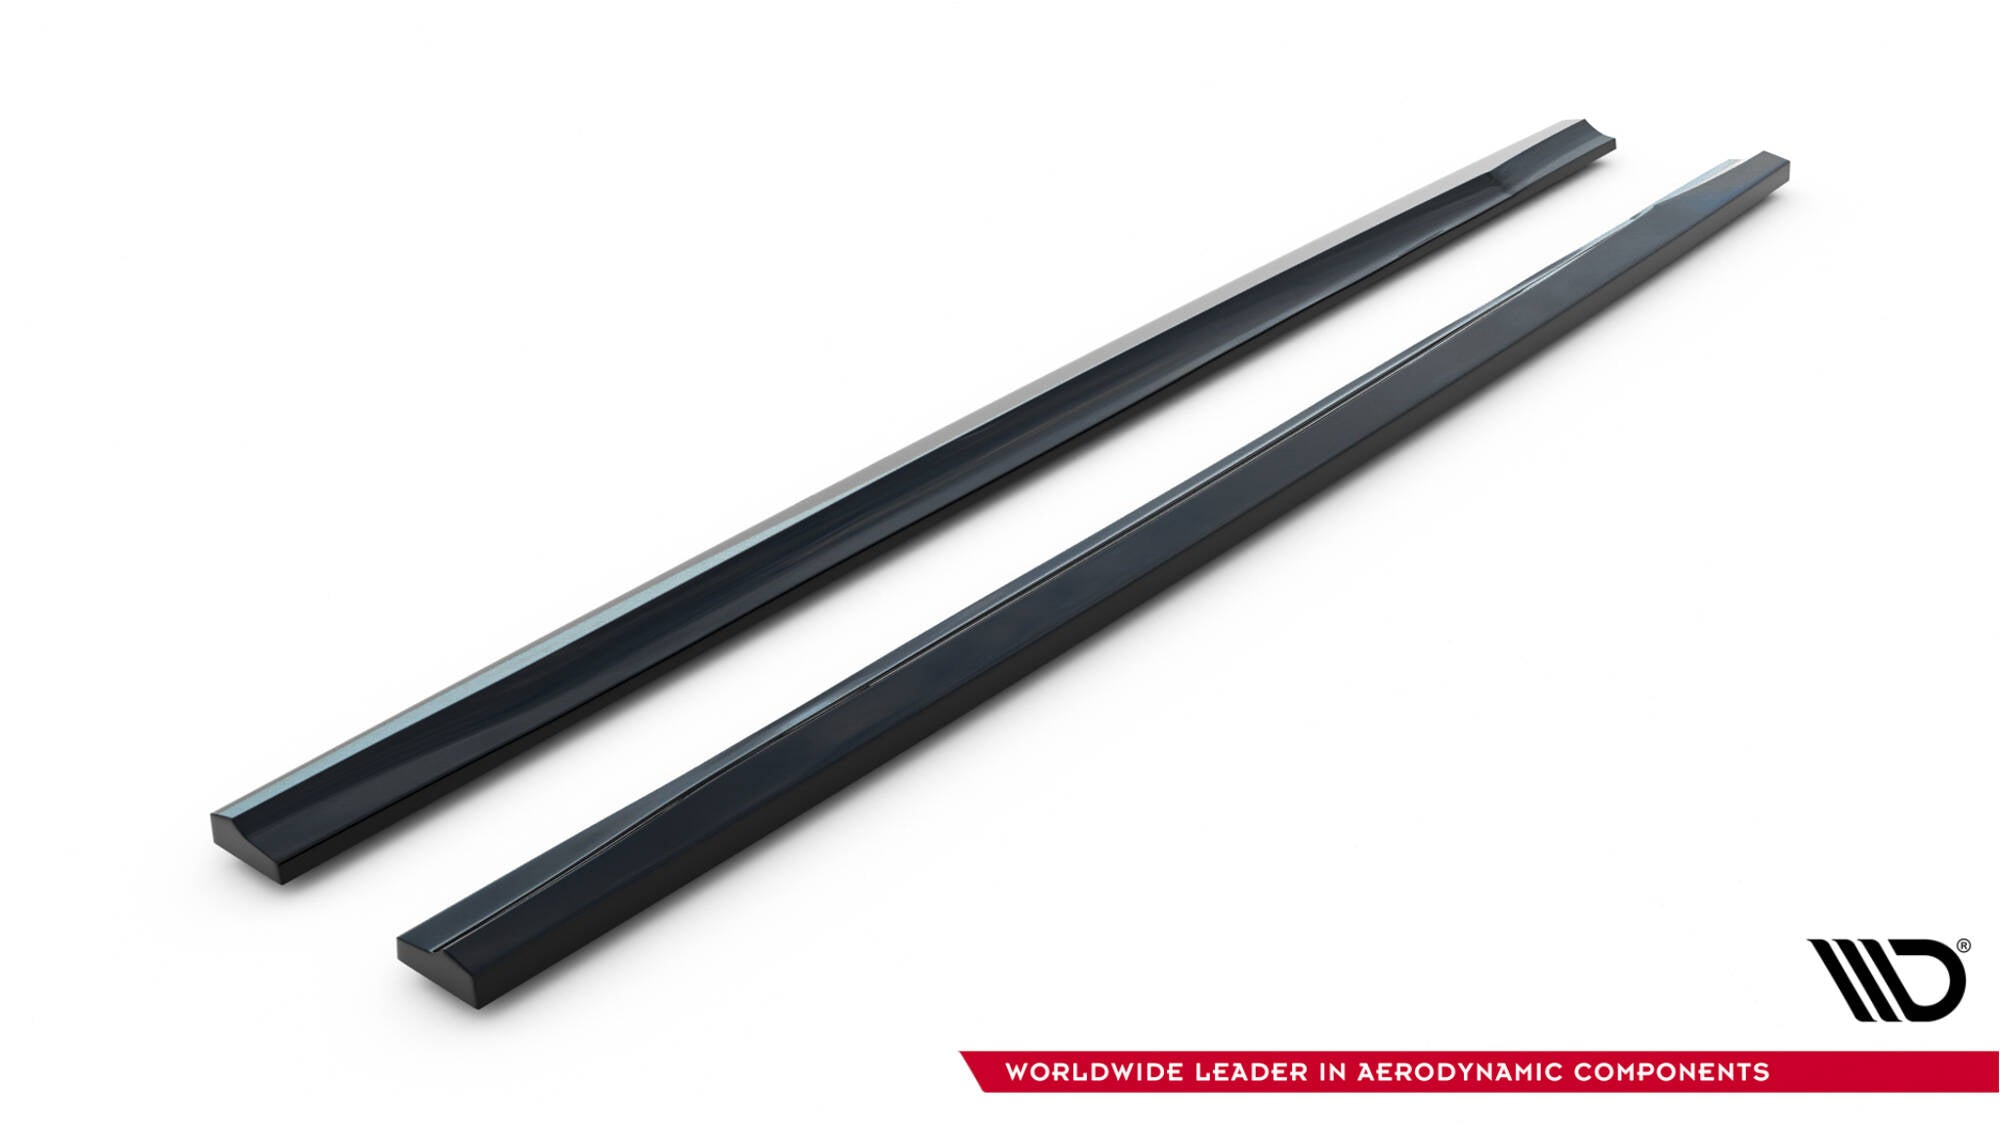 SIDE SKIRTS DIFFUSERS RENAULT MEGANE 3 RS